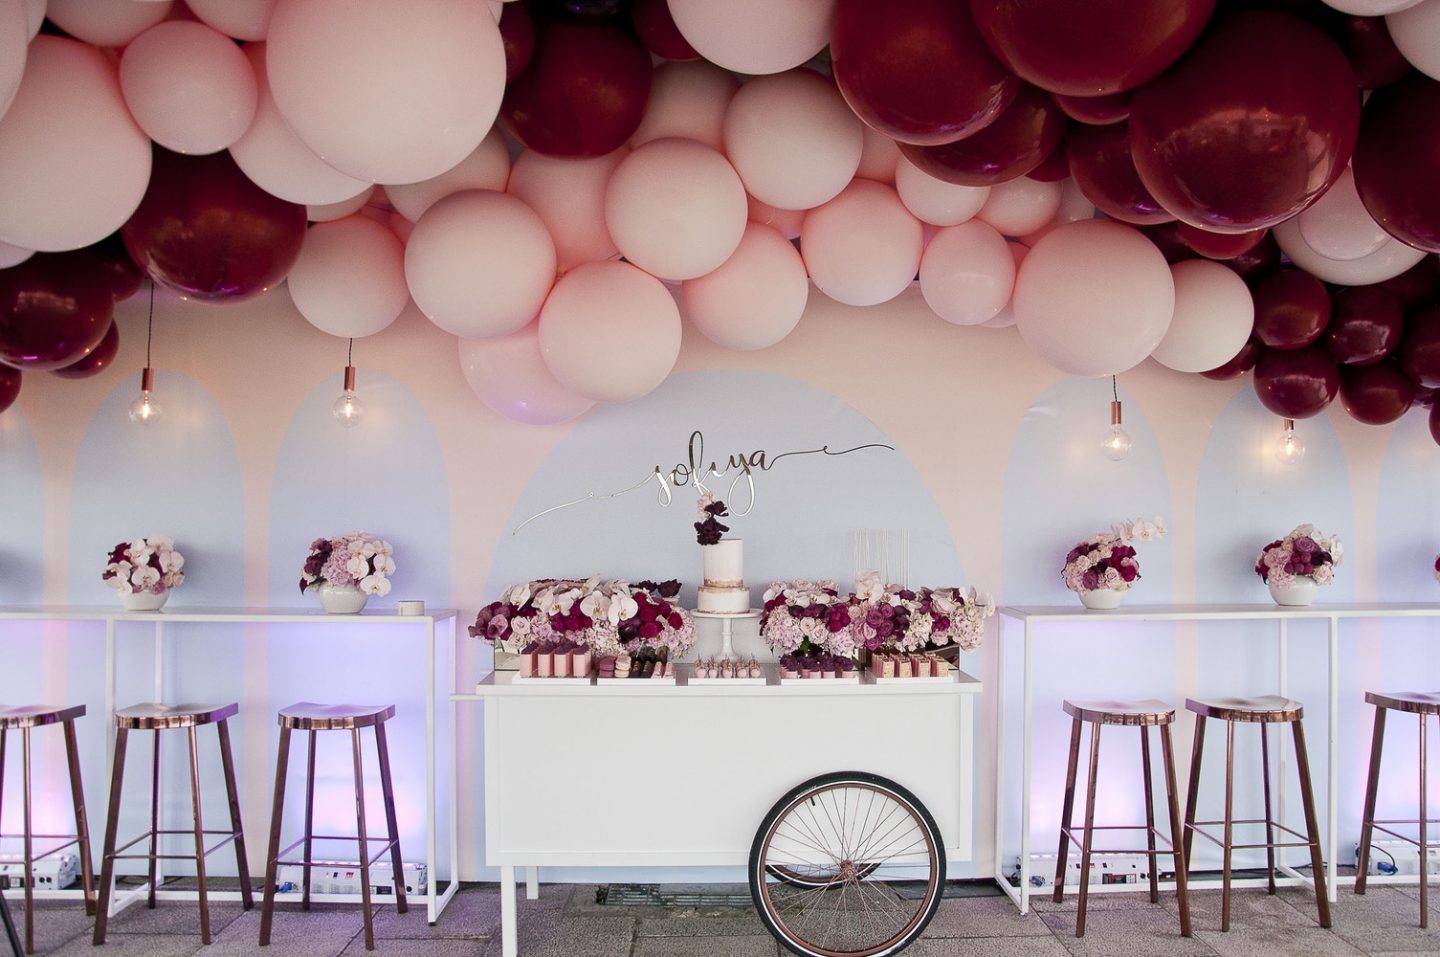 hanging balloons from ceiling